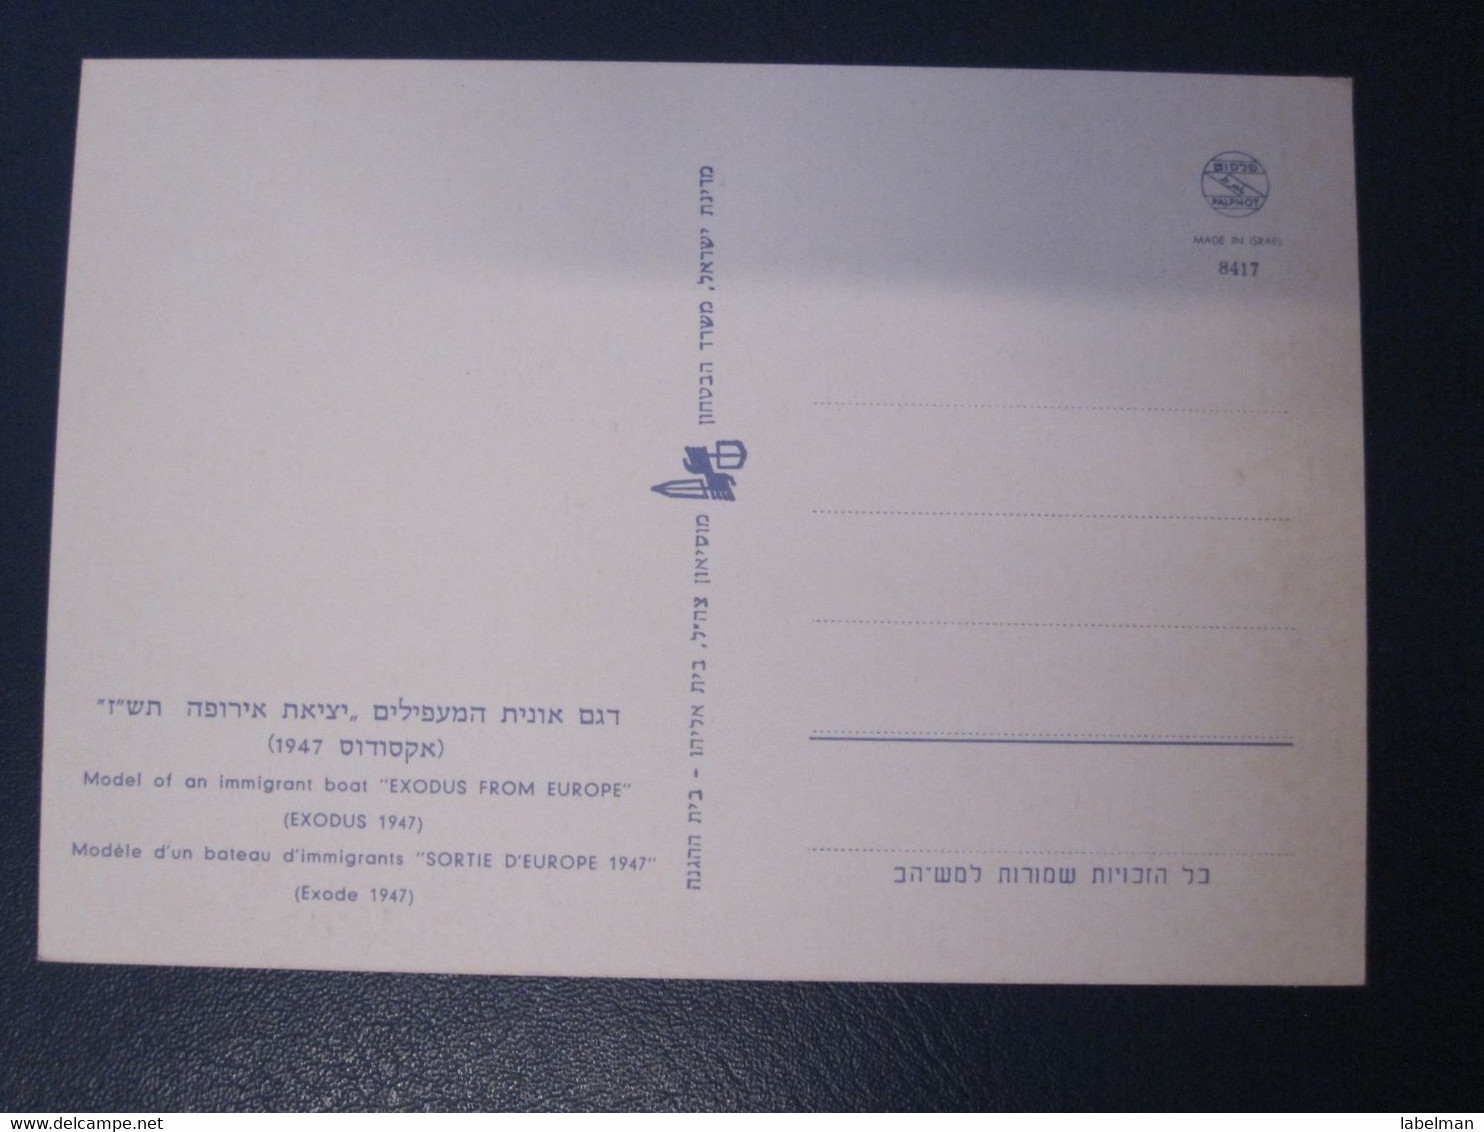 ISRAEL HAGANA ARMY SOLDIERS WELFARE ASSOCIATION IDF DEFENSE FORCE PICTURE POSTCARD ORIGINAL PHOTO POST CARD PC STAMP - Israel